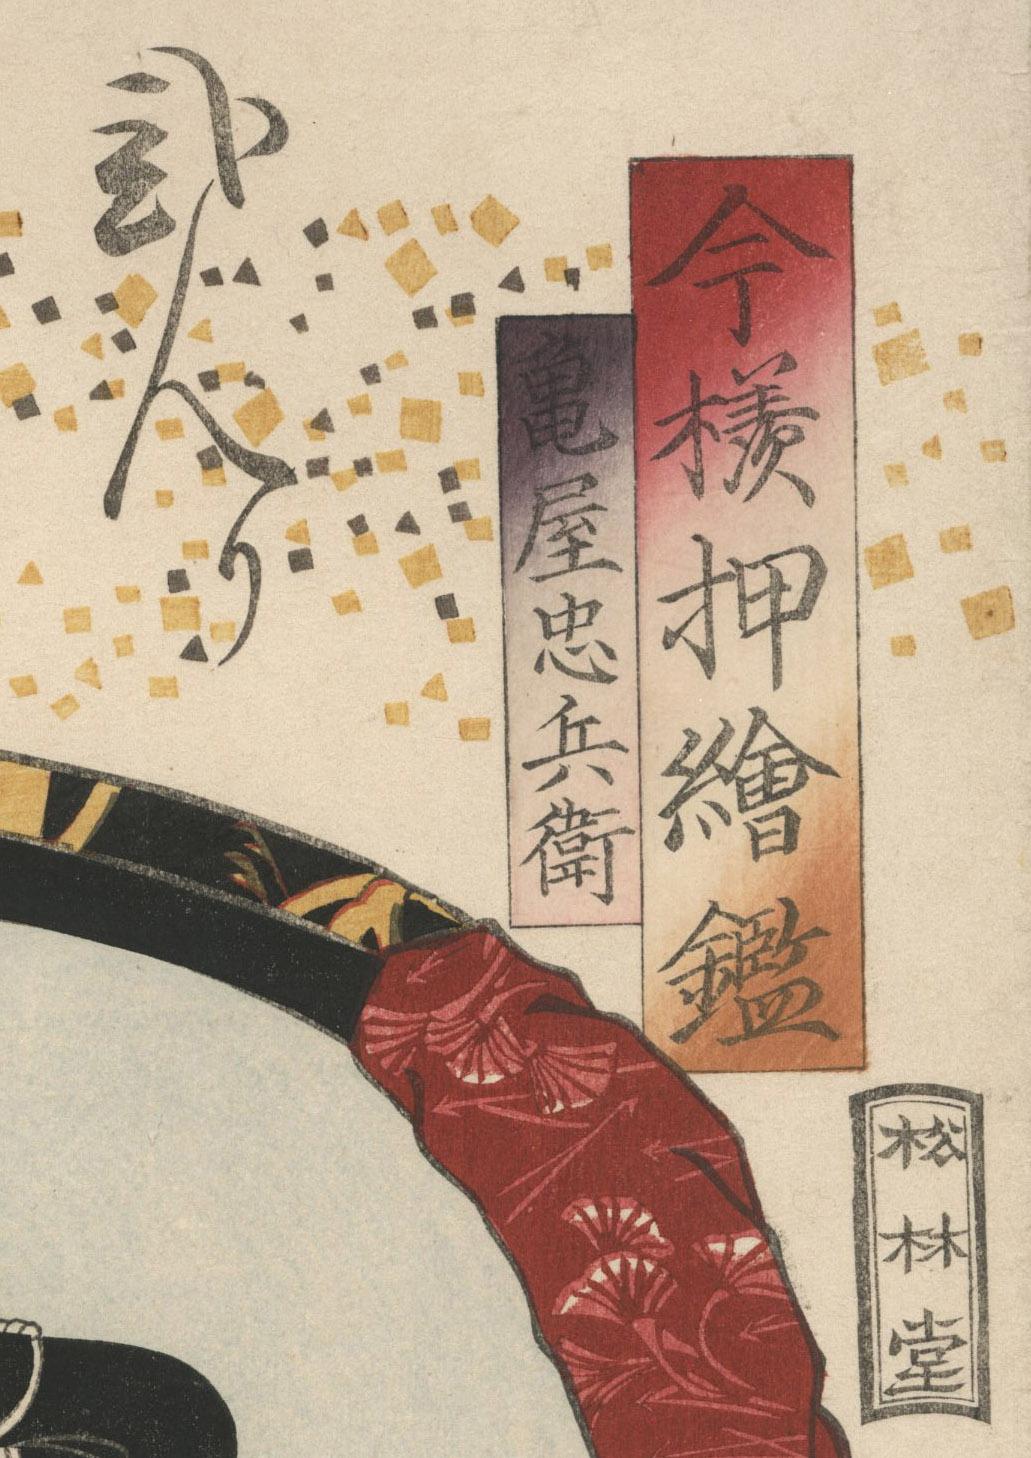 Exceptional, brilliant impression and colors from the extremely rare 1st edition
Kataoka Nizayemon(?)
Color woodcut, 1860
From the series: 